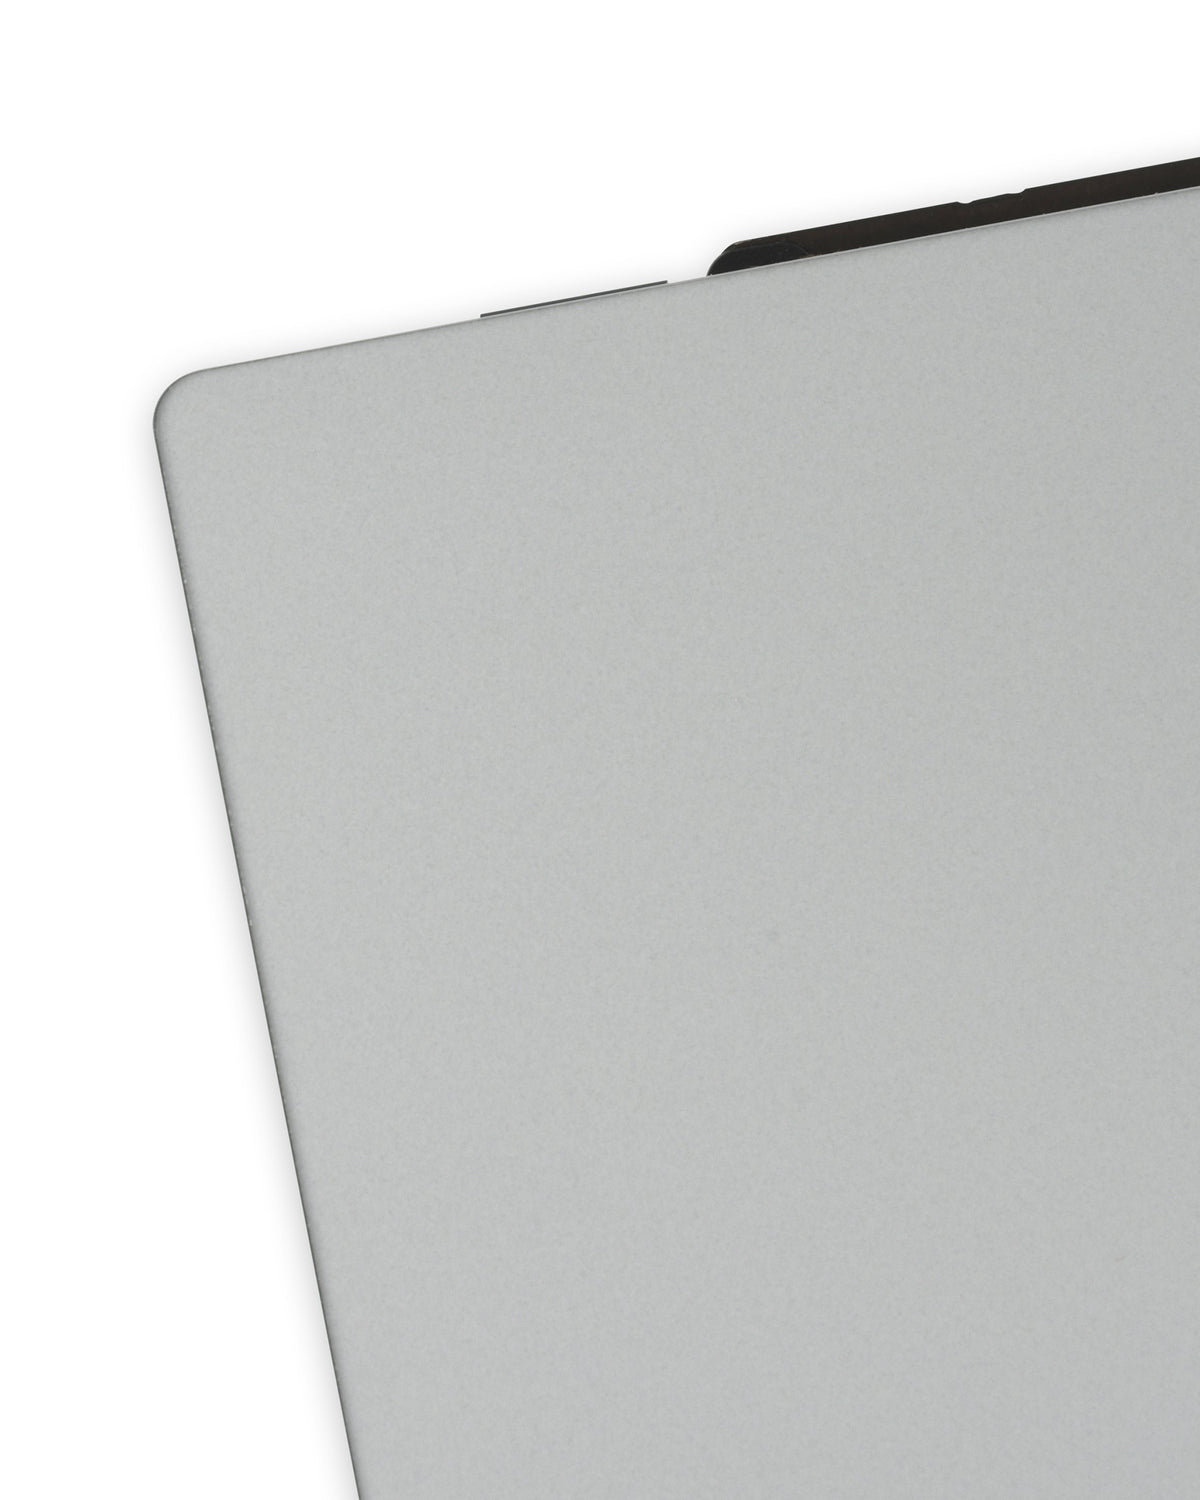 TRACKPAD FOR MACBOOK PRO 13" RETINA A1425 (MID 2012 / EARLY 2013) (A1502 / LATE 2013 / MID 2014)